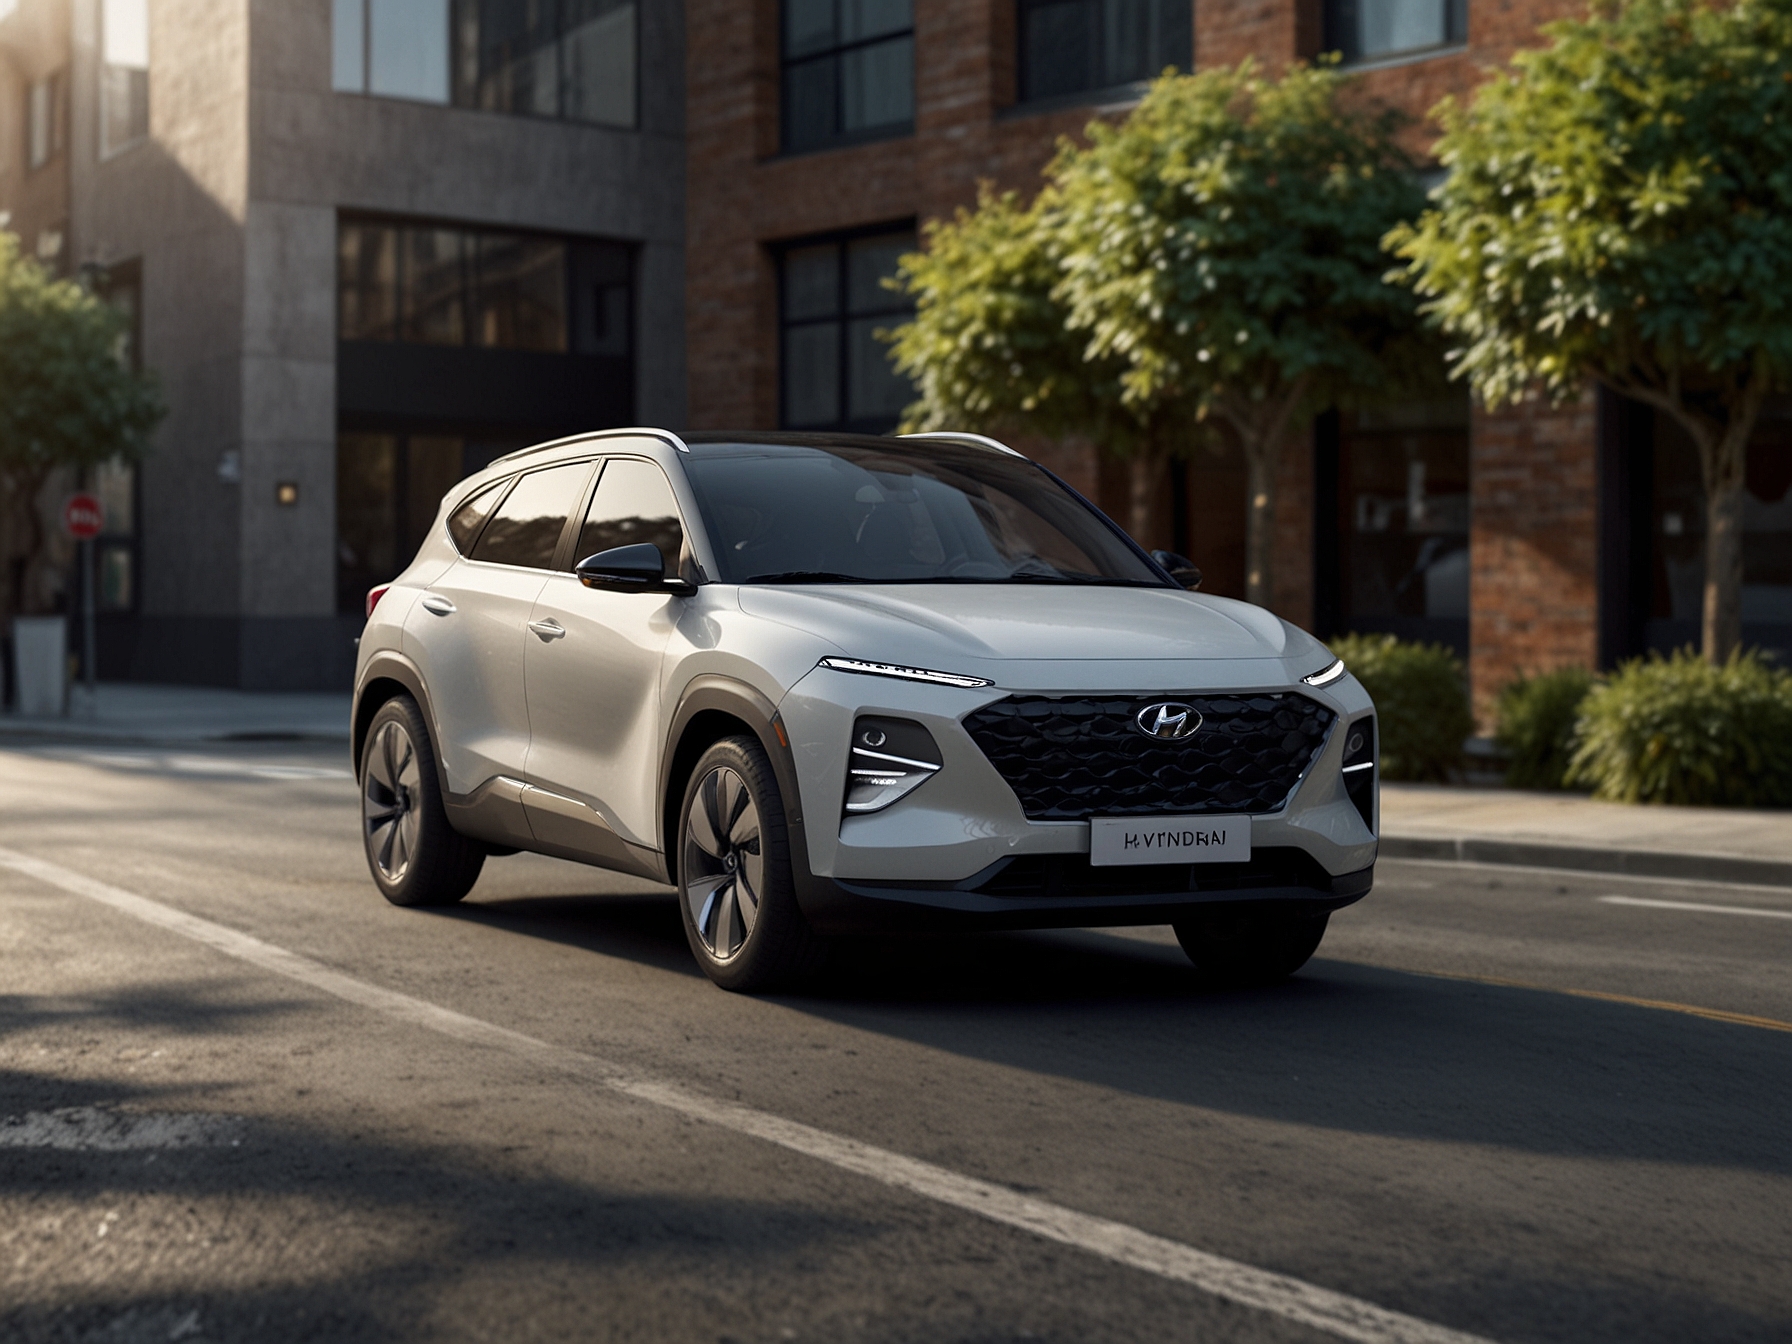 The new Hyundai EV is designed with eco-friendly materials and features a battery that provides 221 miles per charge, making it ideal for both daily commutes and long journeys.